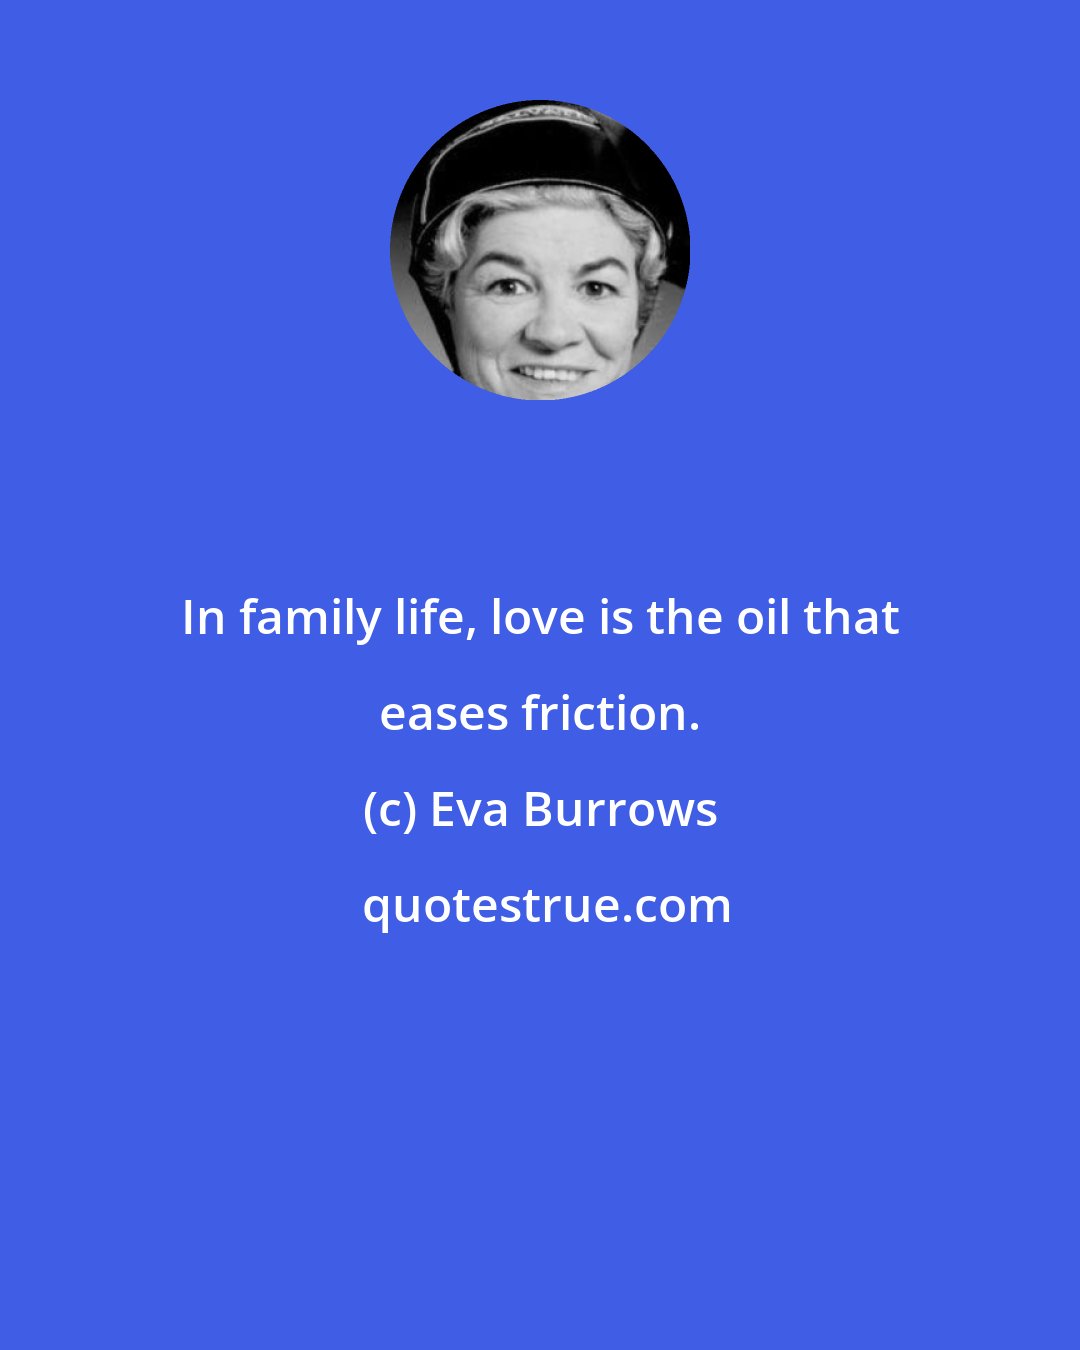 Eva Burrows: In family life, love is the oil that eases friction.